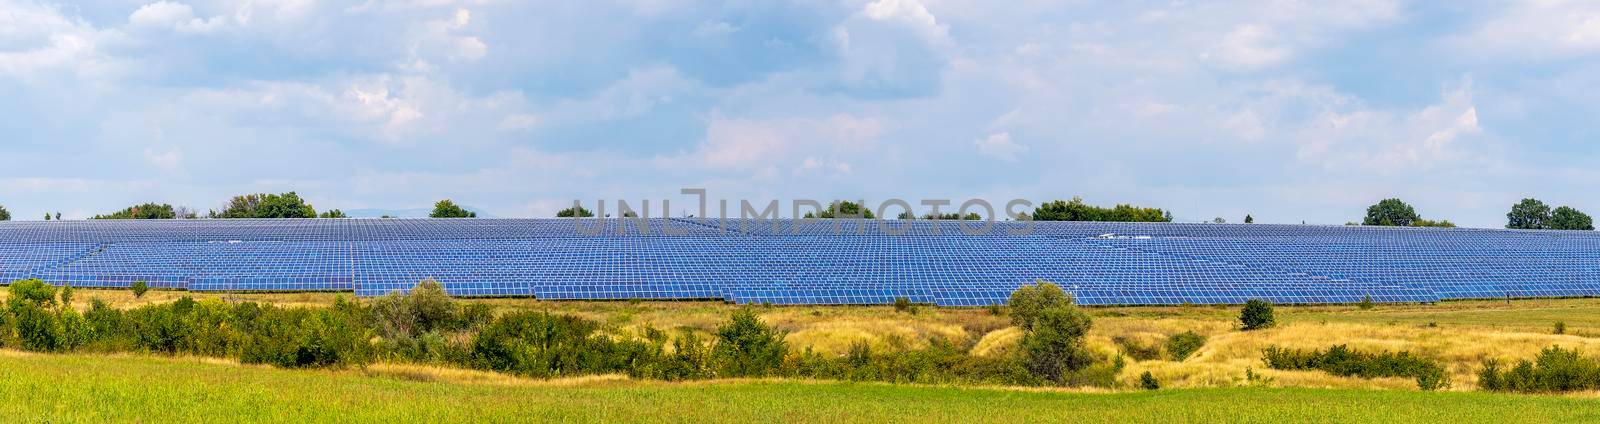 Banner of solar panels at hills against the sky. Industry concept